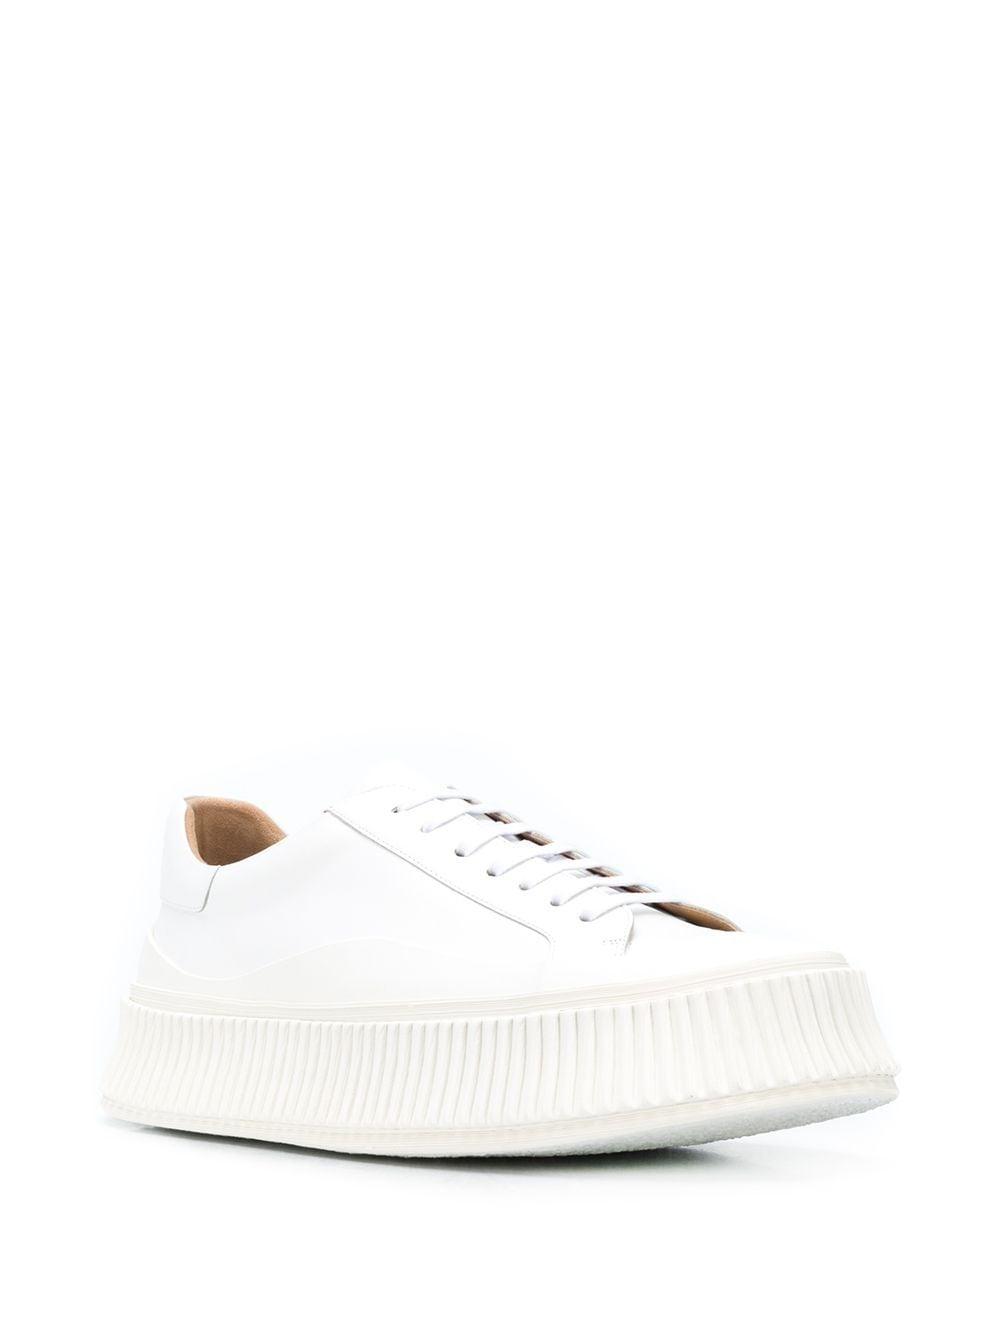 Jil Sander Leather Low-top Sneakers in White for Men - Lyst